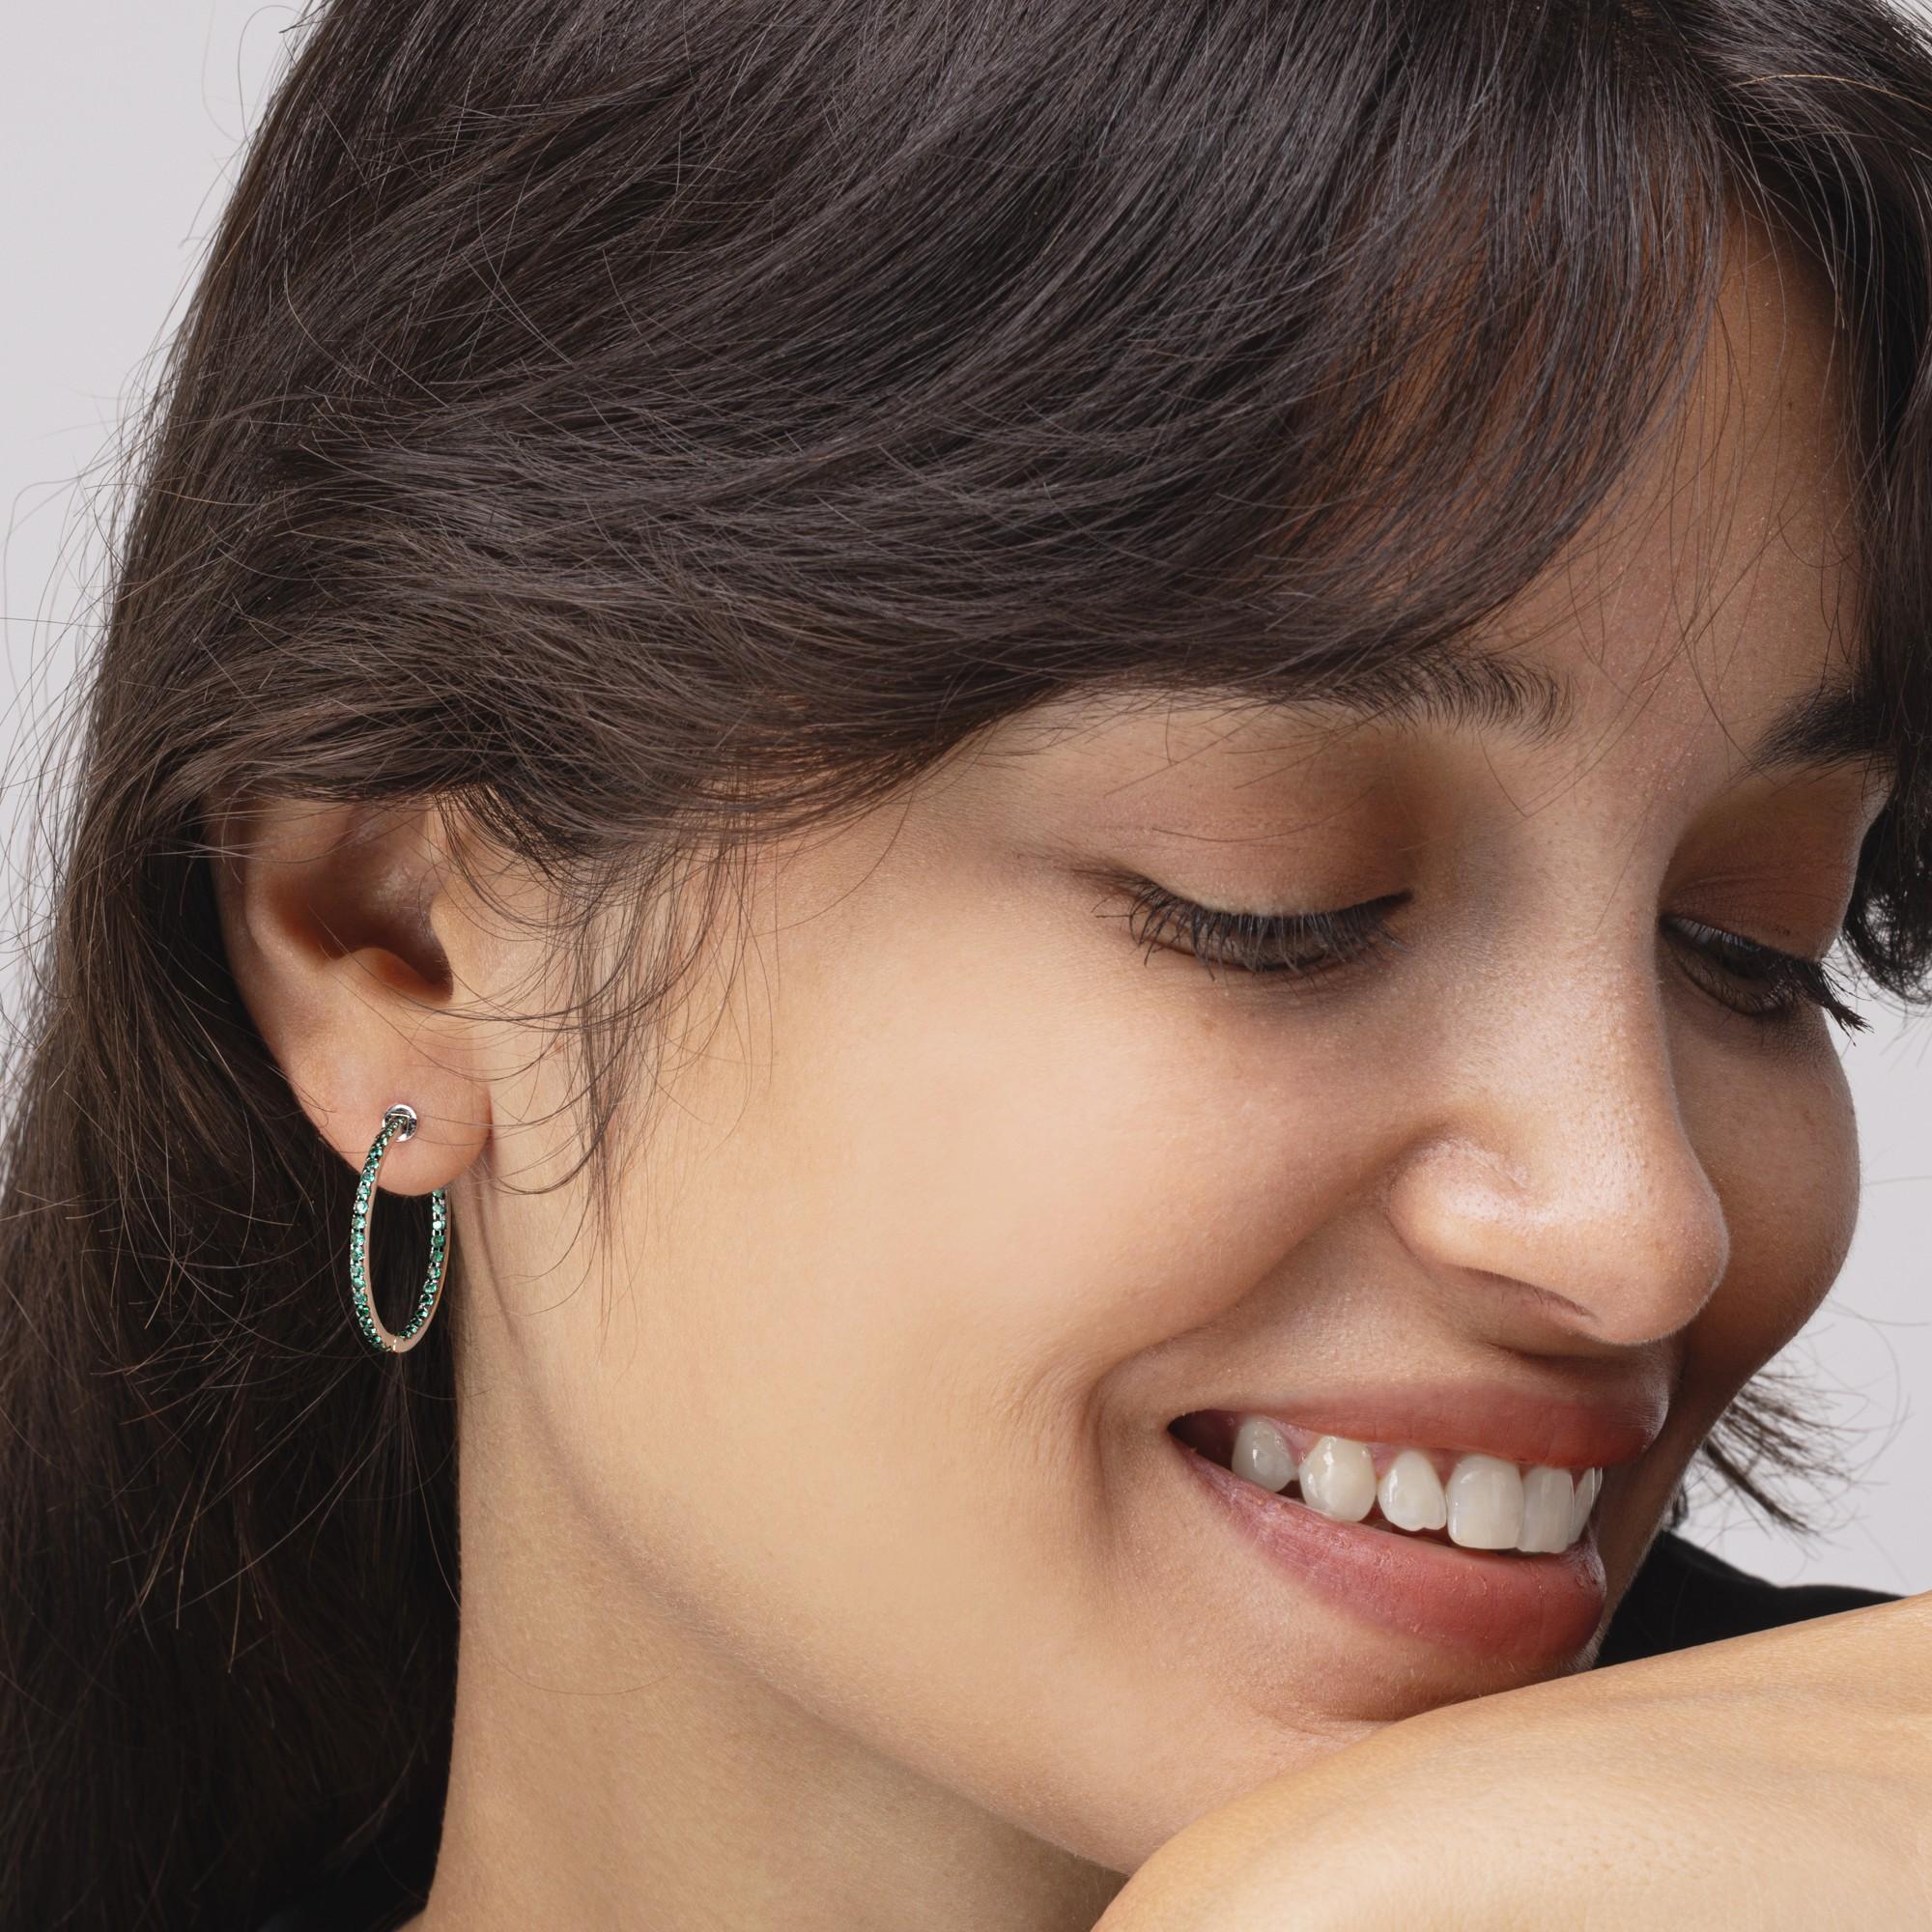 Alex Jona design collection, hand crafted in Italy, 18 karat white gold hoop earrings featuring 0.72 carats of emeralds.

Alex Jona jewels stand out, not only for their special design and for the excellent quality of the gemstones, but also for the